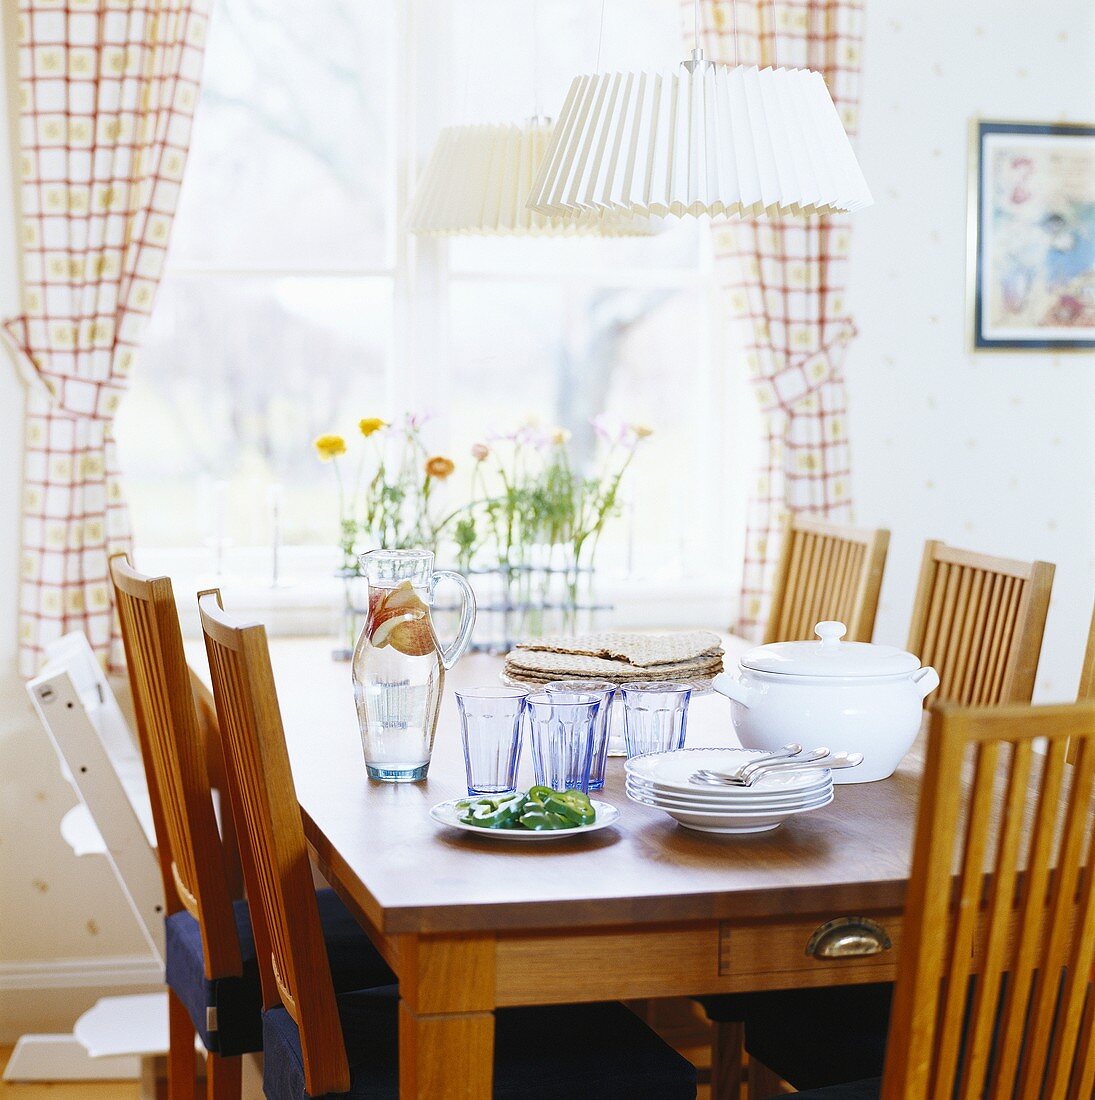 Dining table with plates and glasses by window